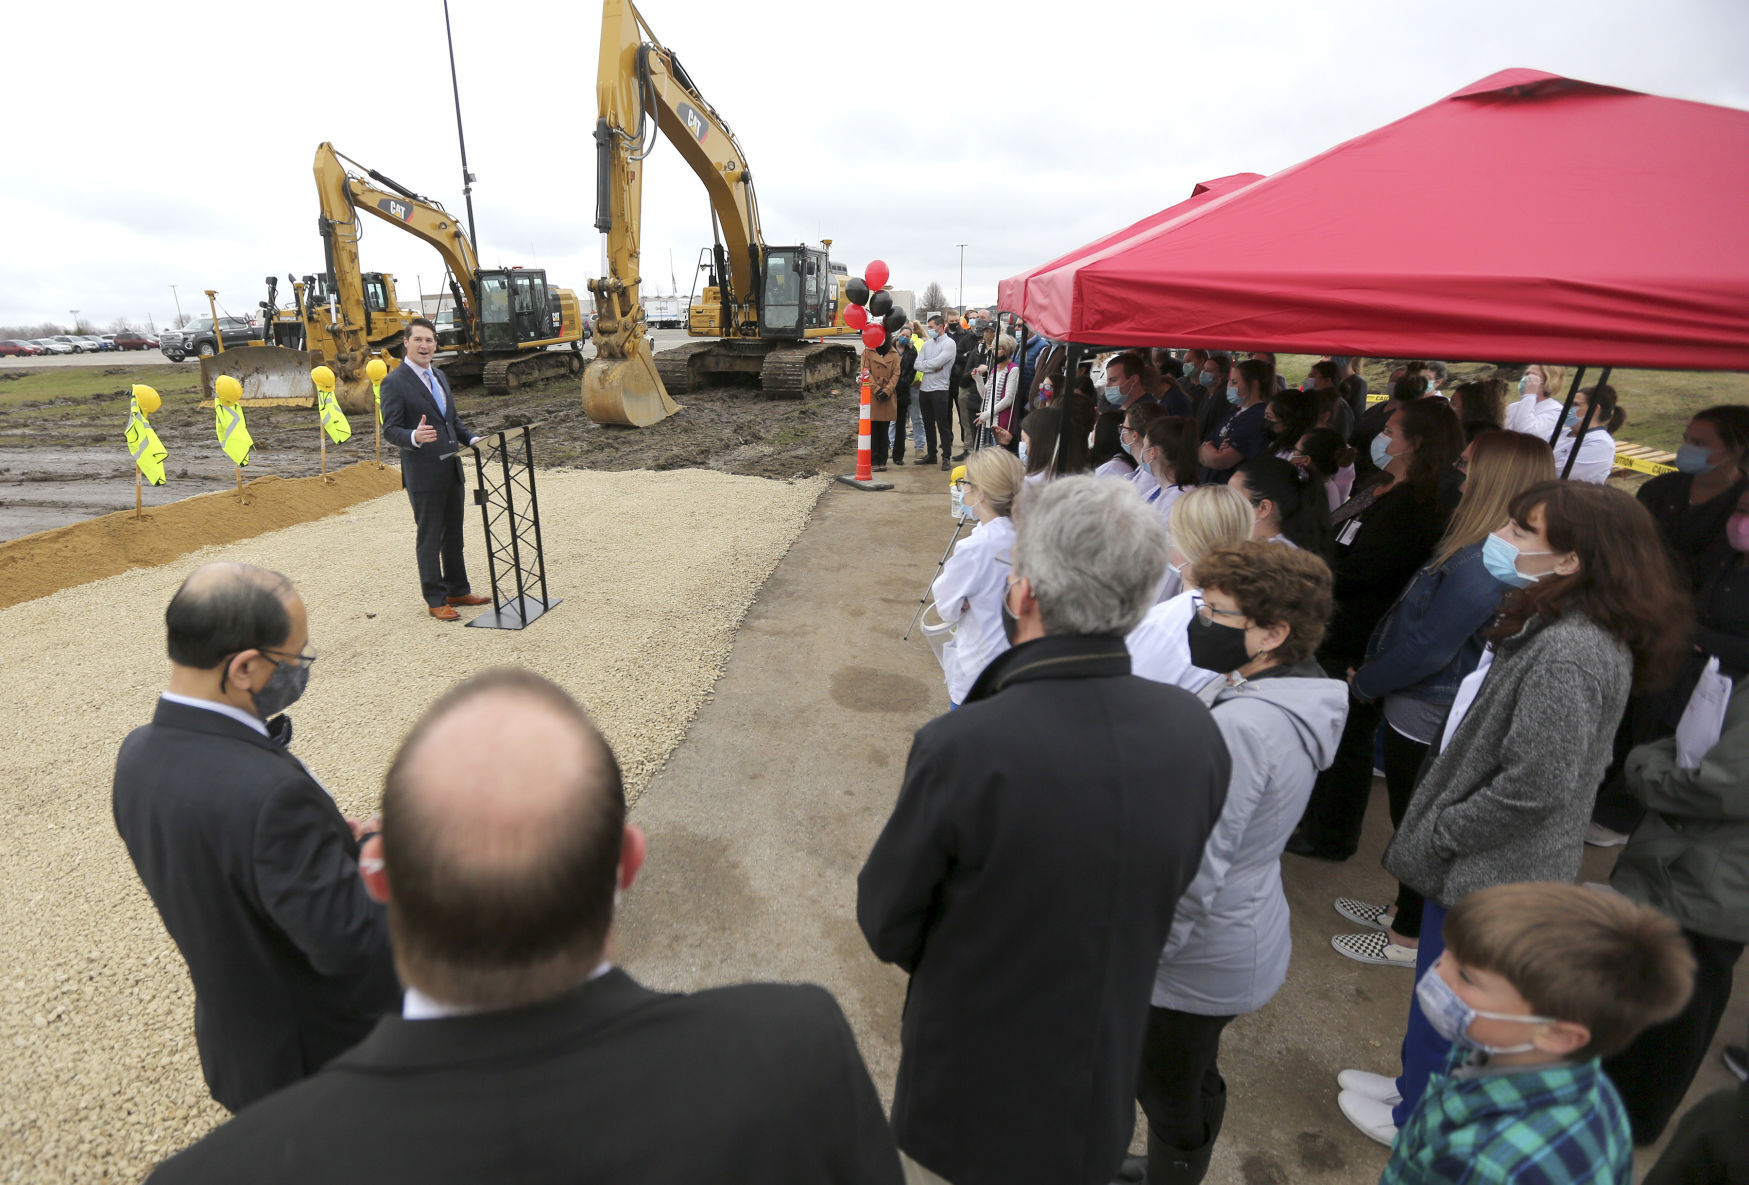 Wes Schulte, managing partner with Merit Development, speaks Thursday during a groundbreaking for the College Suites development that will be constructed on the edge of the Northeast Iowa Community College campus in Peosta, Iowa. PHOTO CREDIT: Dave Kettering